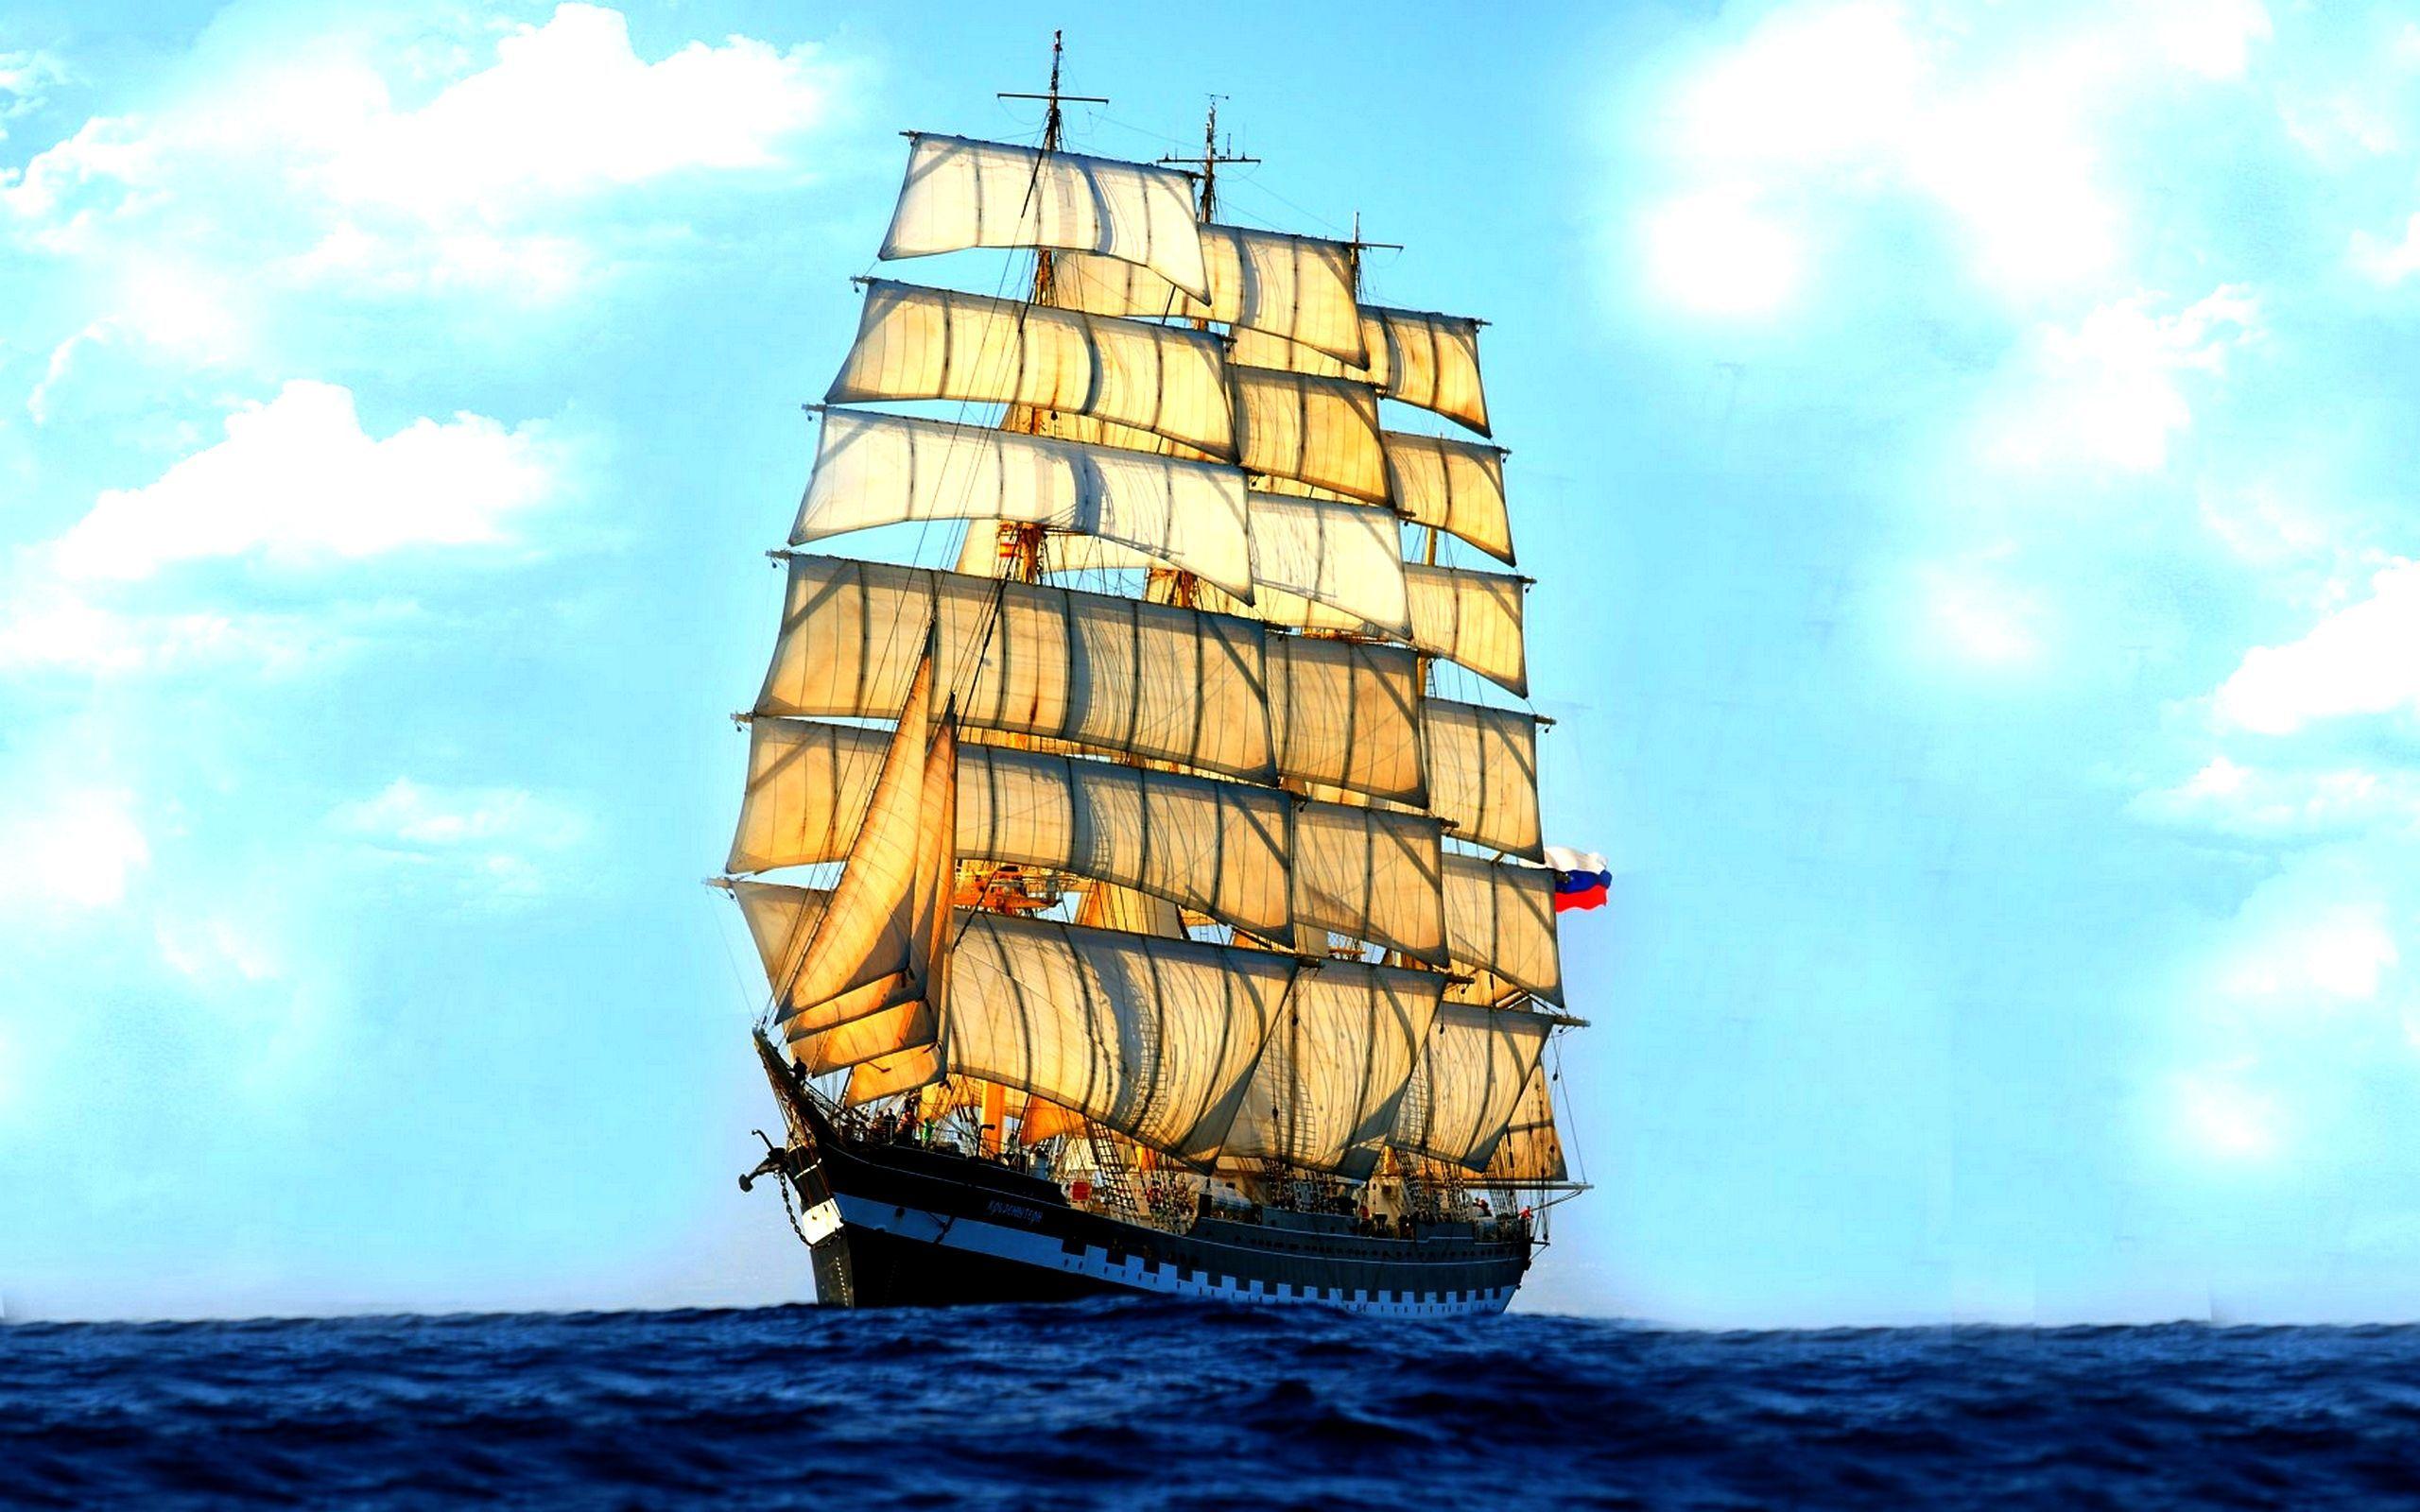 Sailing ship Wallpaper. Picture